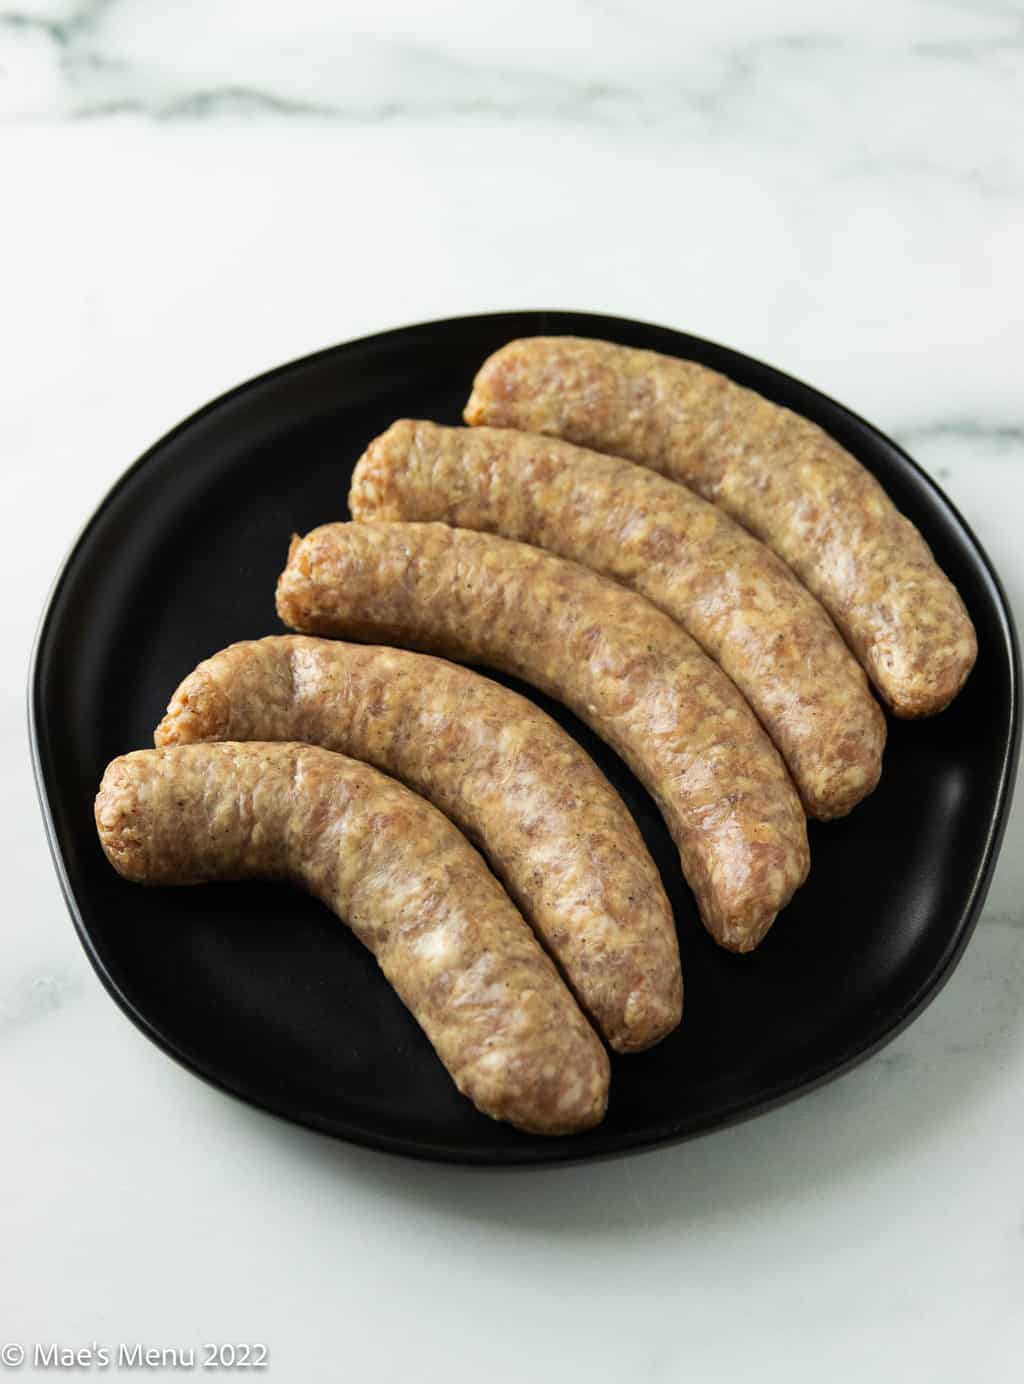 A black plate of uncooked brats.